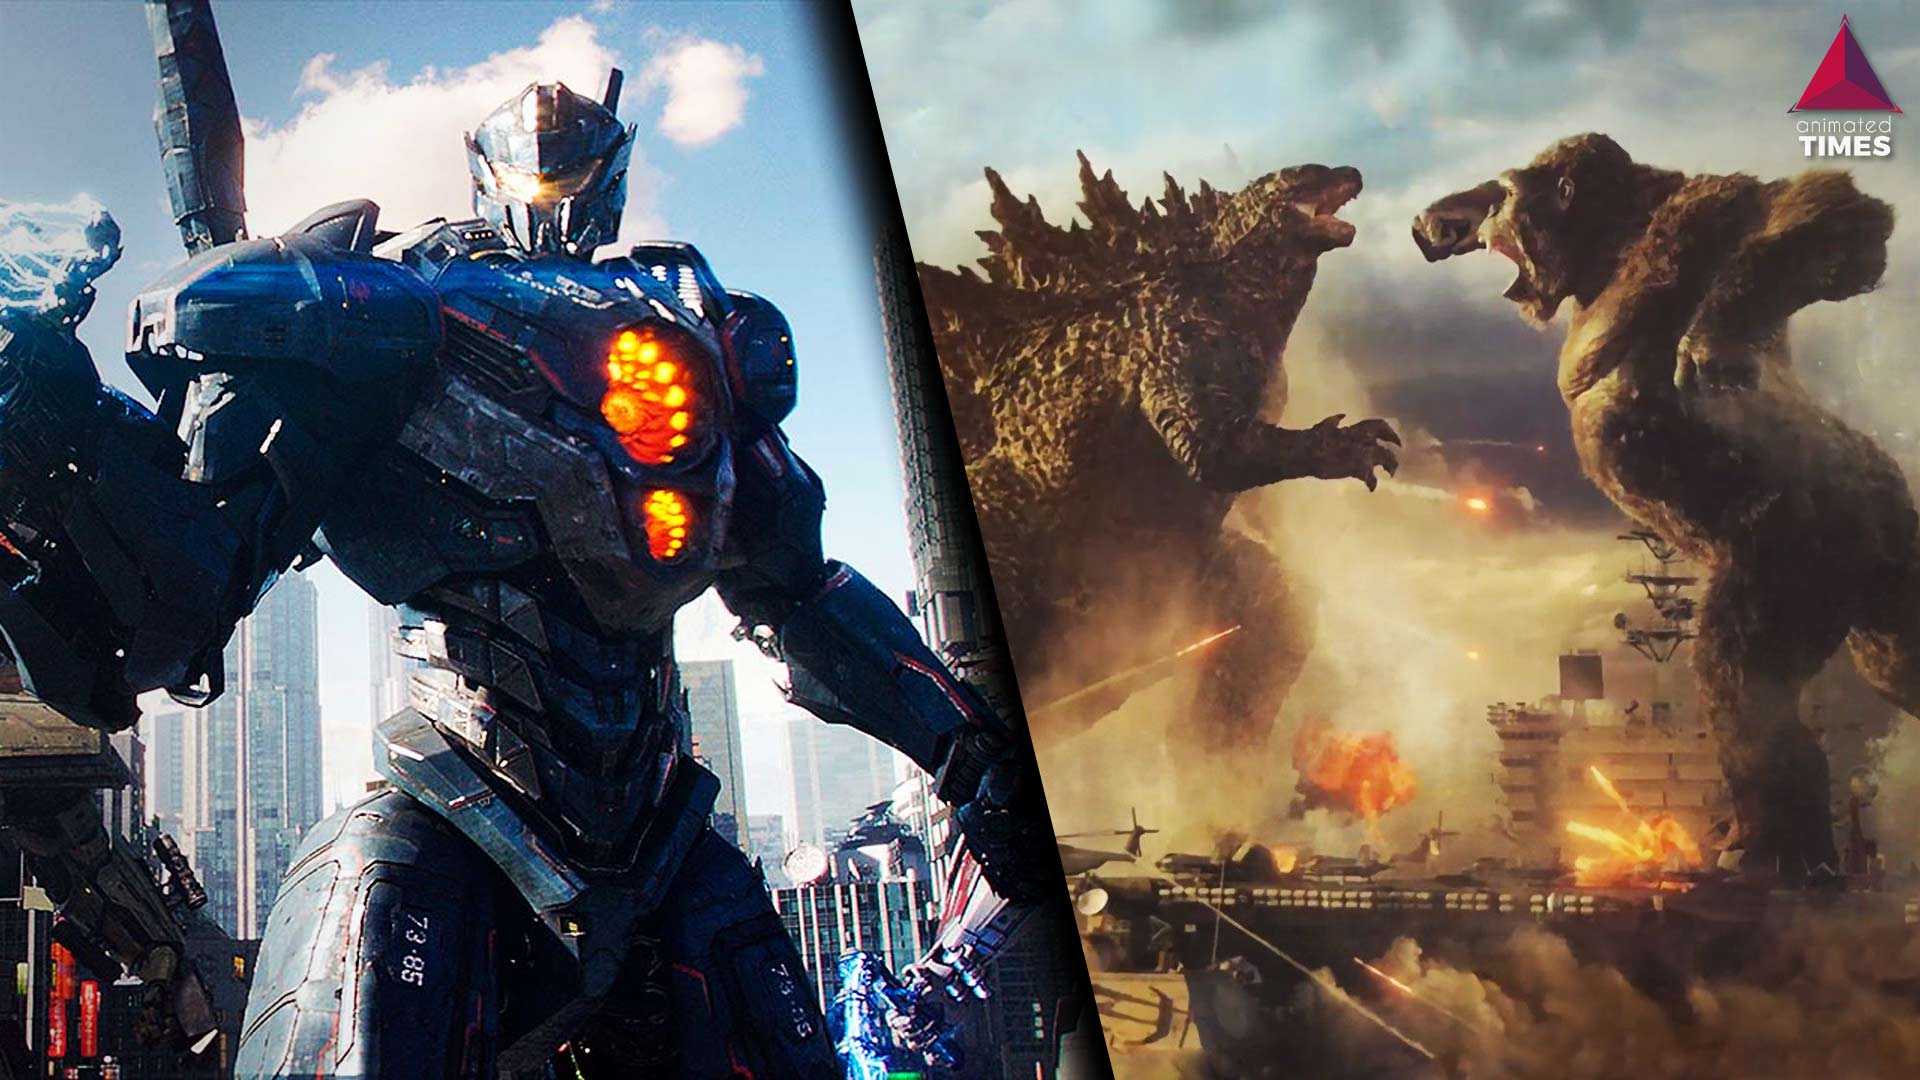 Pacific Rim 3 Was Supposed to Connect With Godzilla vs. Kong’s MonsterVerse